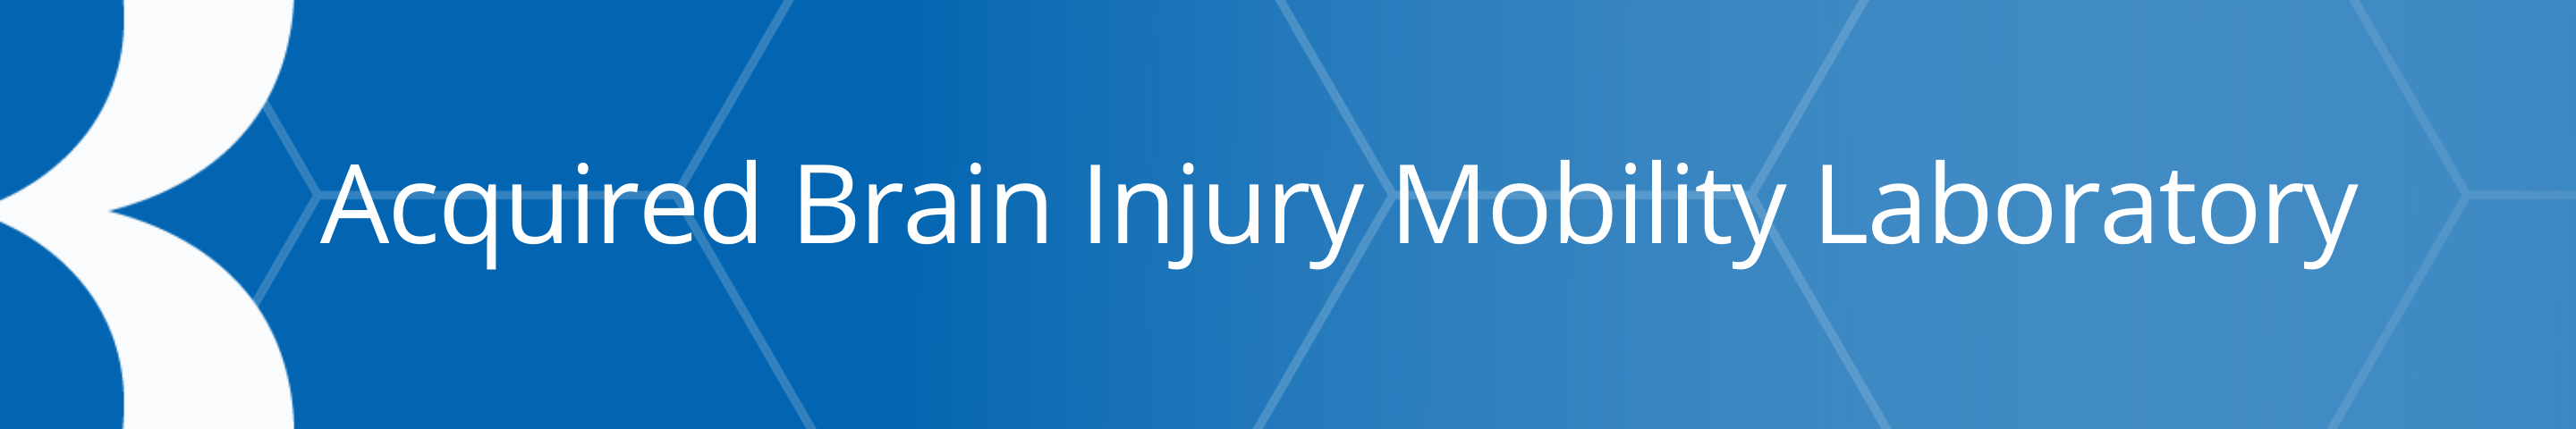 Acquired Brain Injury Mobility Laboratory blue banner